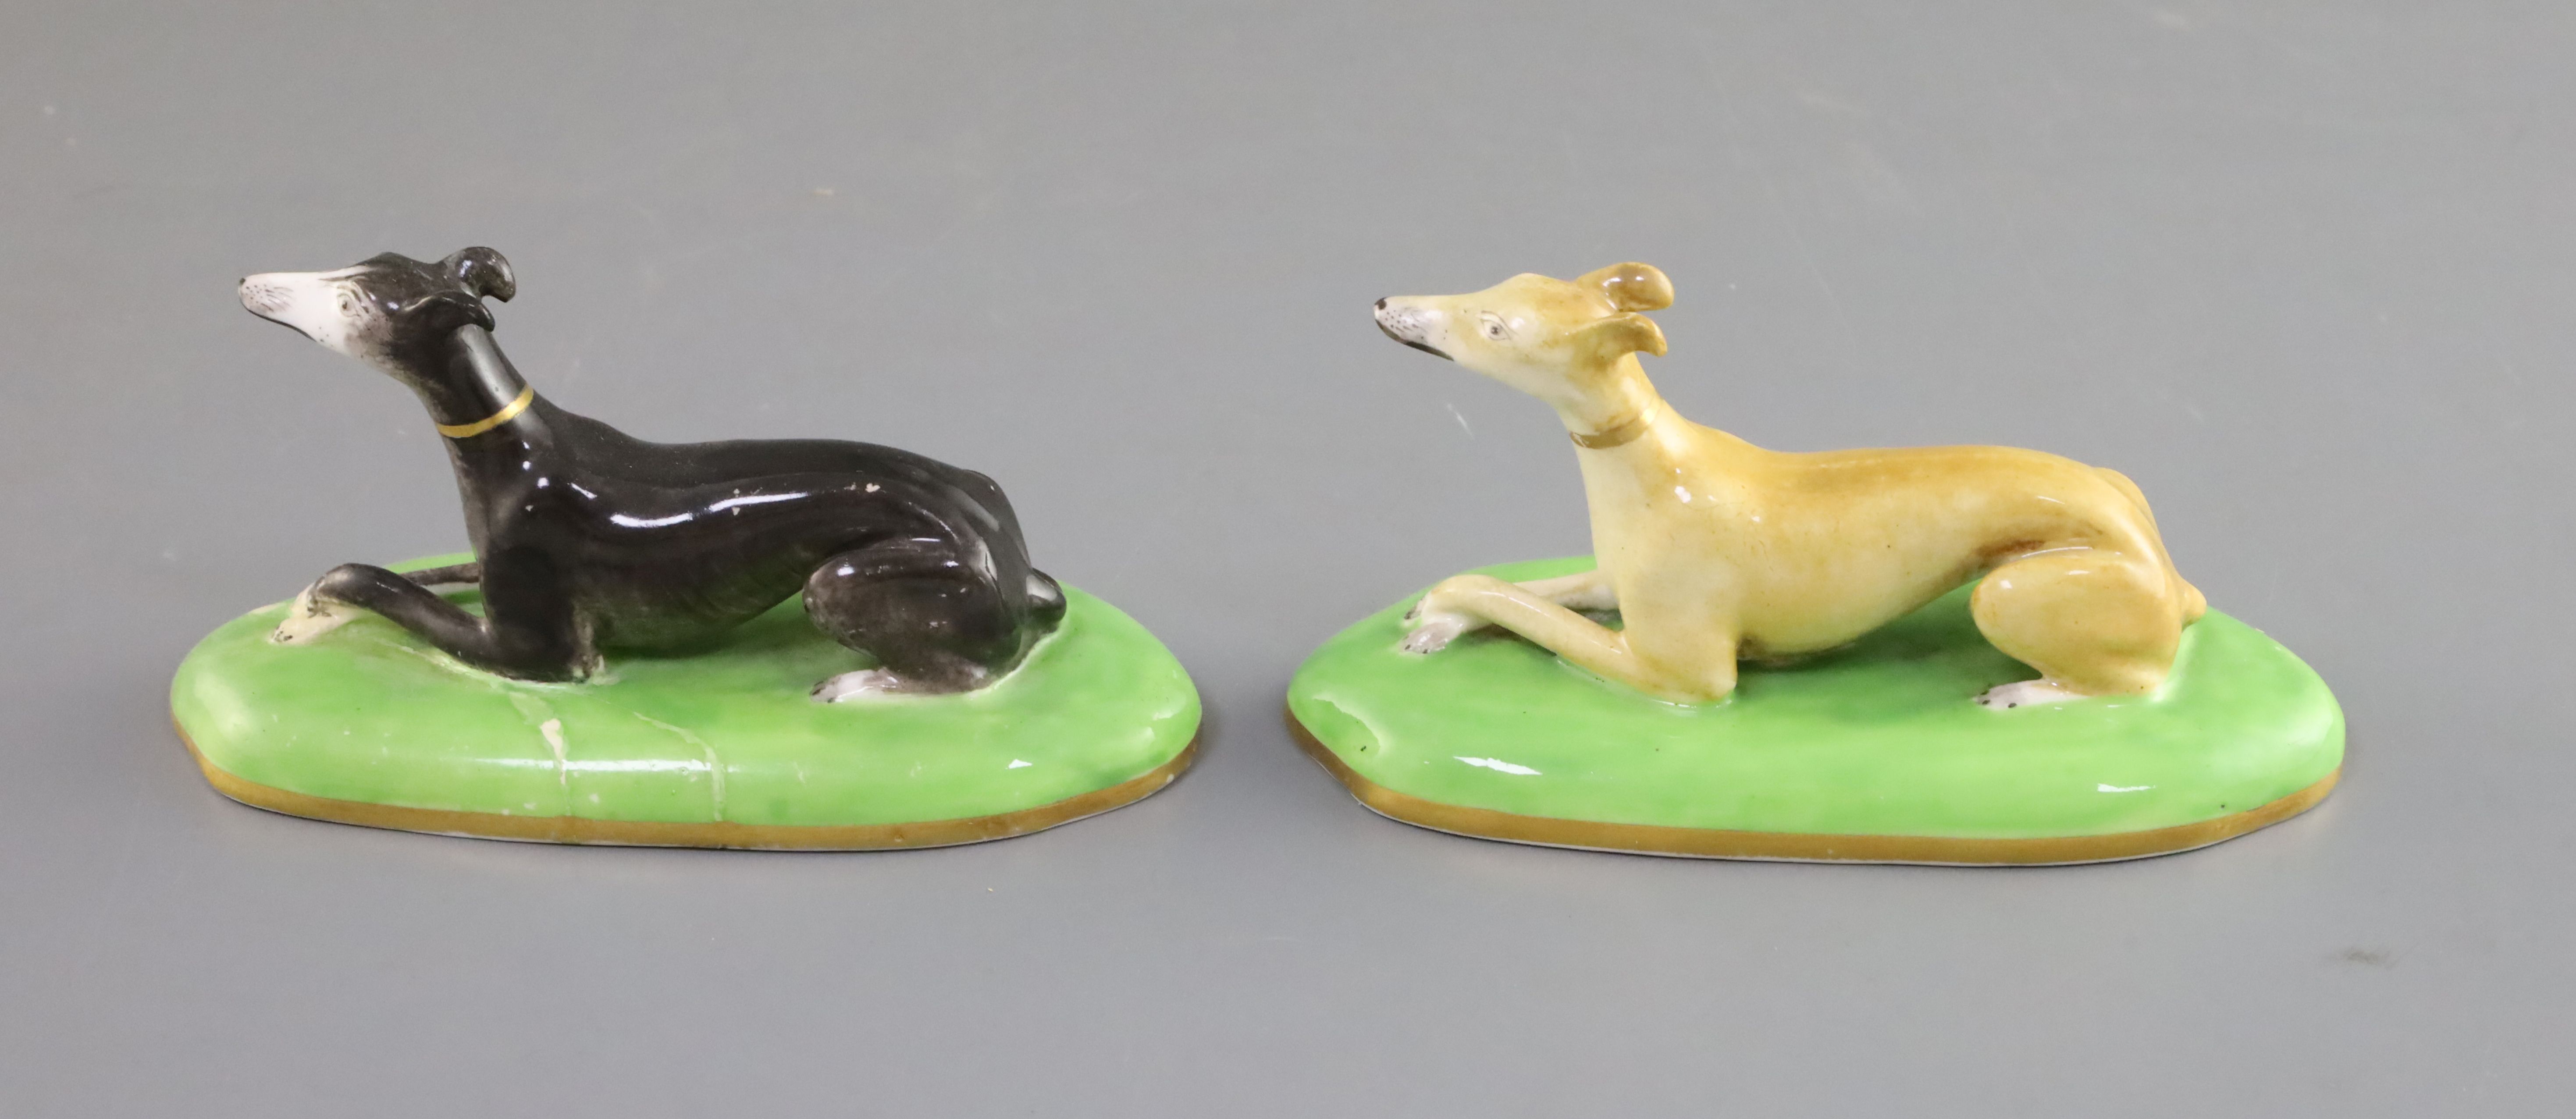 A pair of Copeland & Garrett porcelain figures of greyhounds, c.1833-47, each recumbent on a shallow - Image 2 of 3